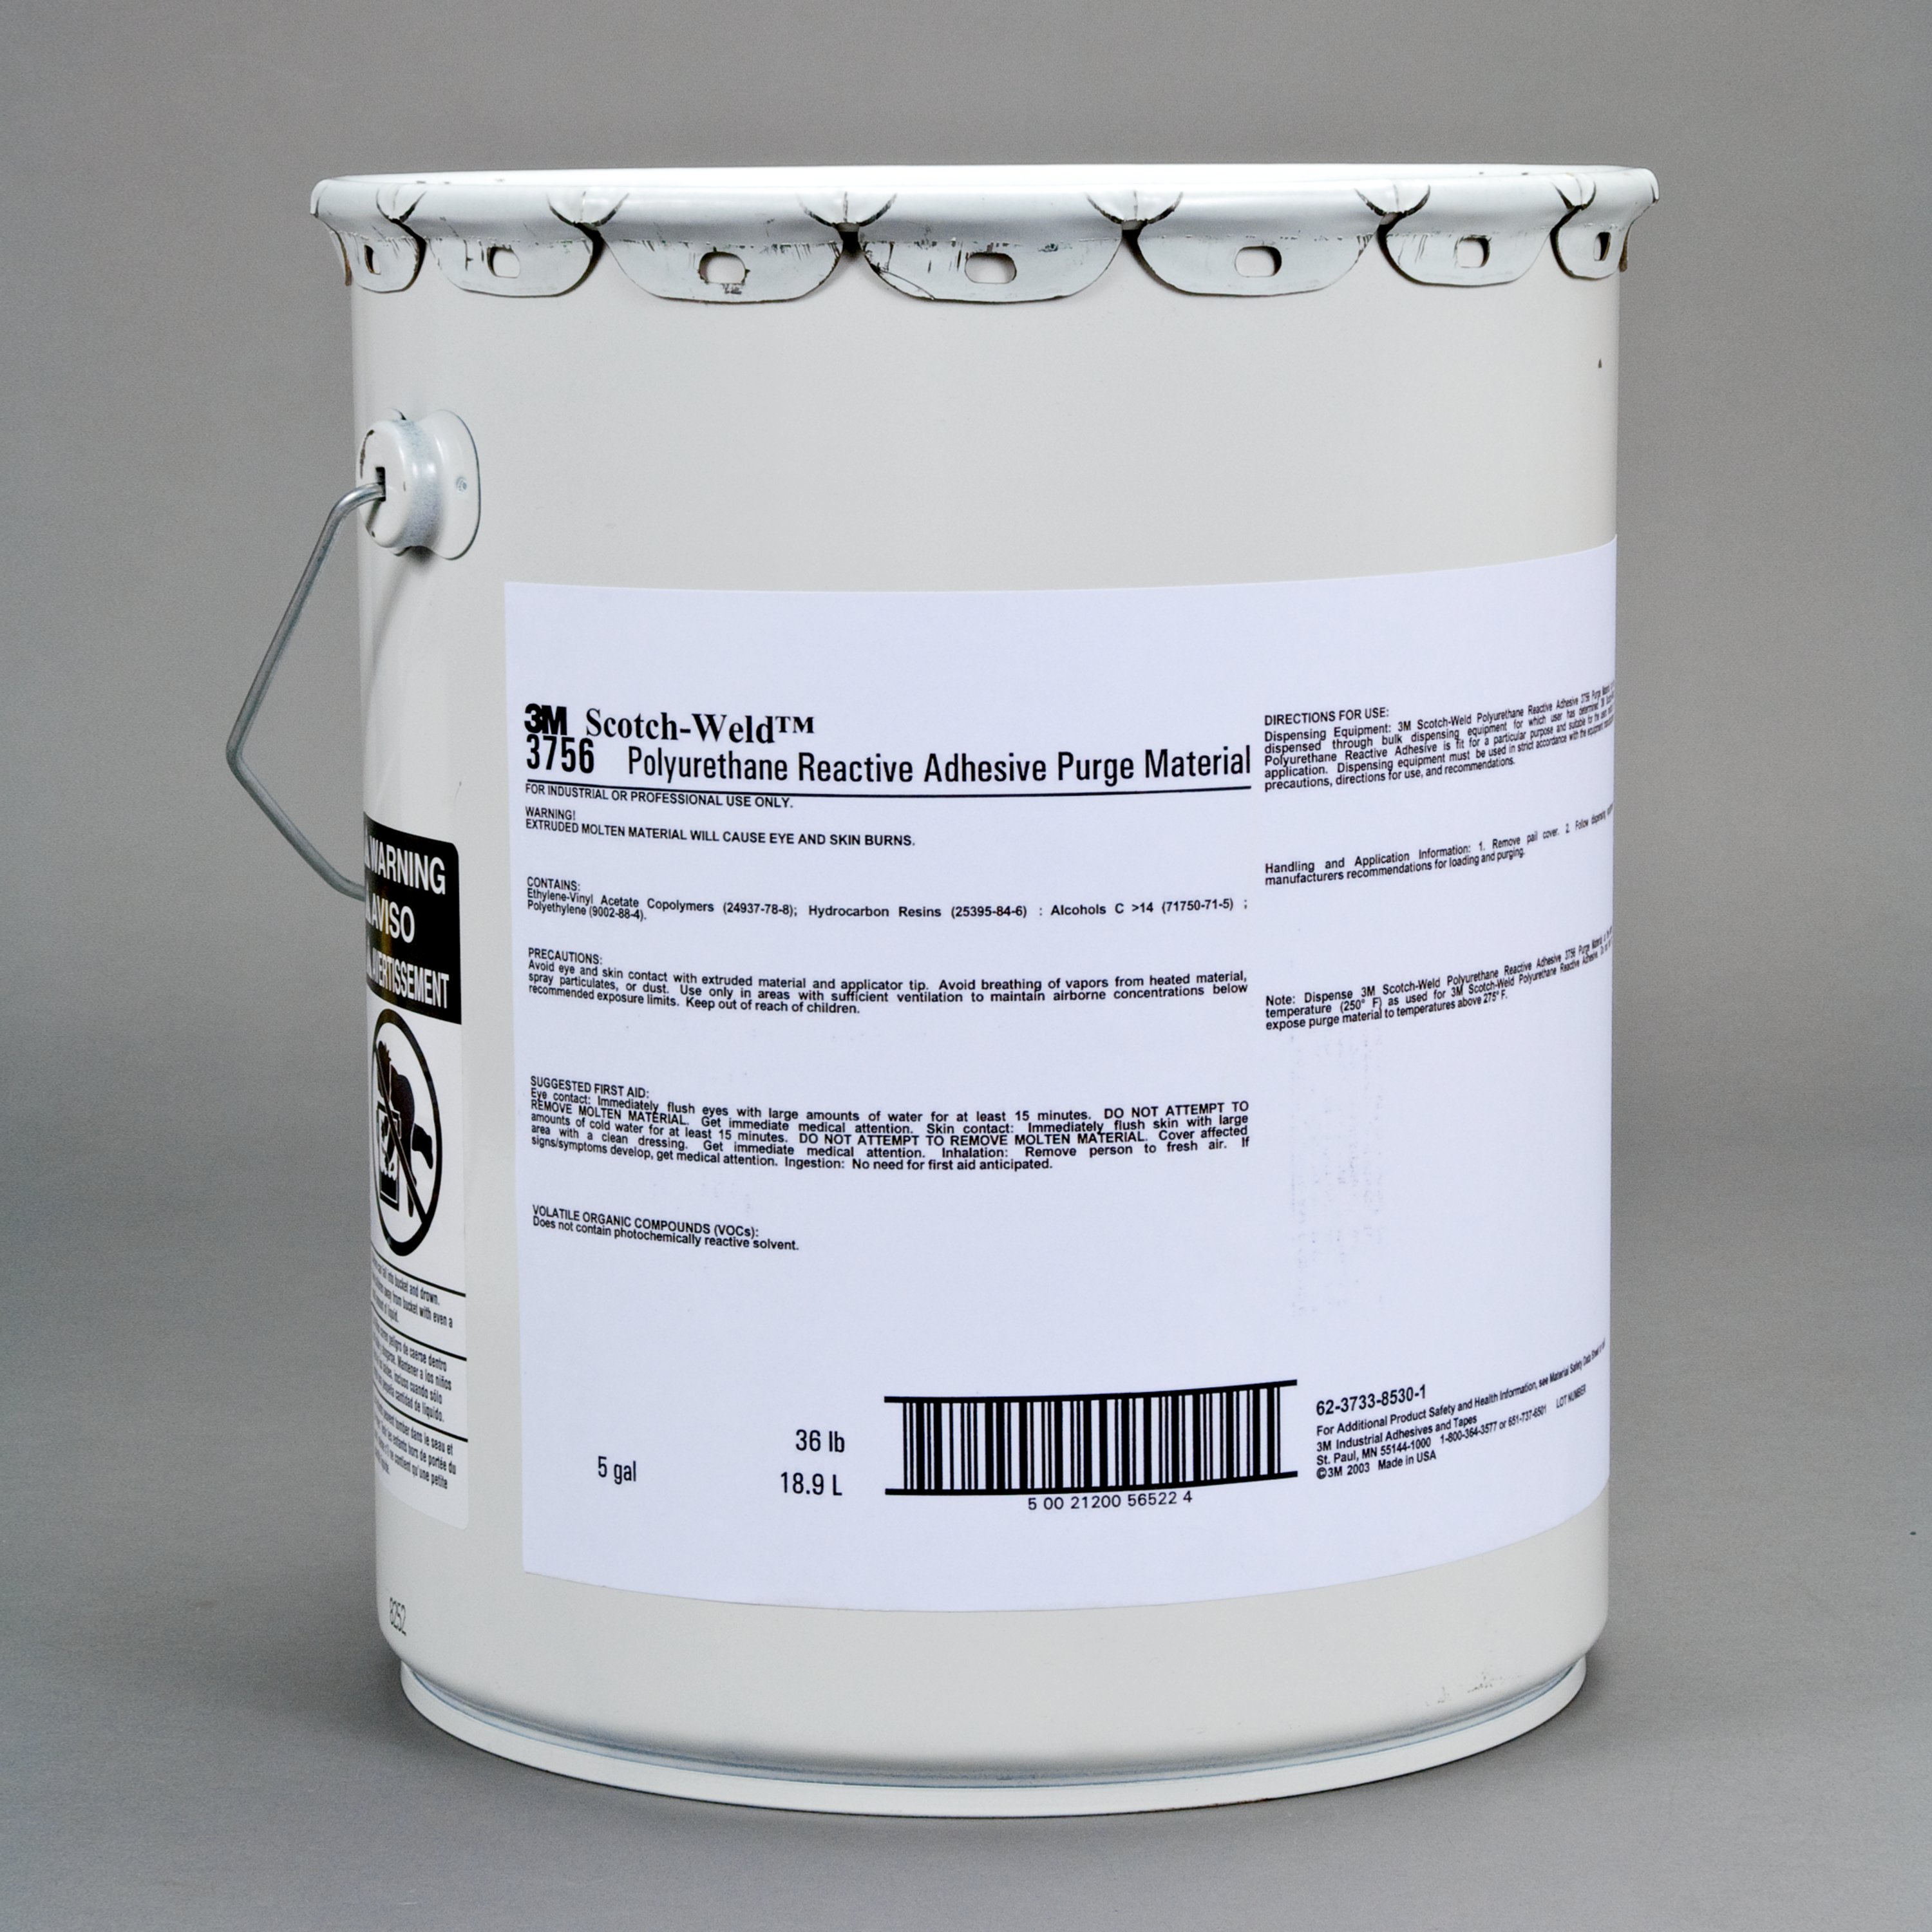 5 gallon pail container of material